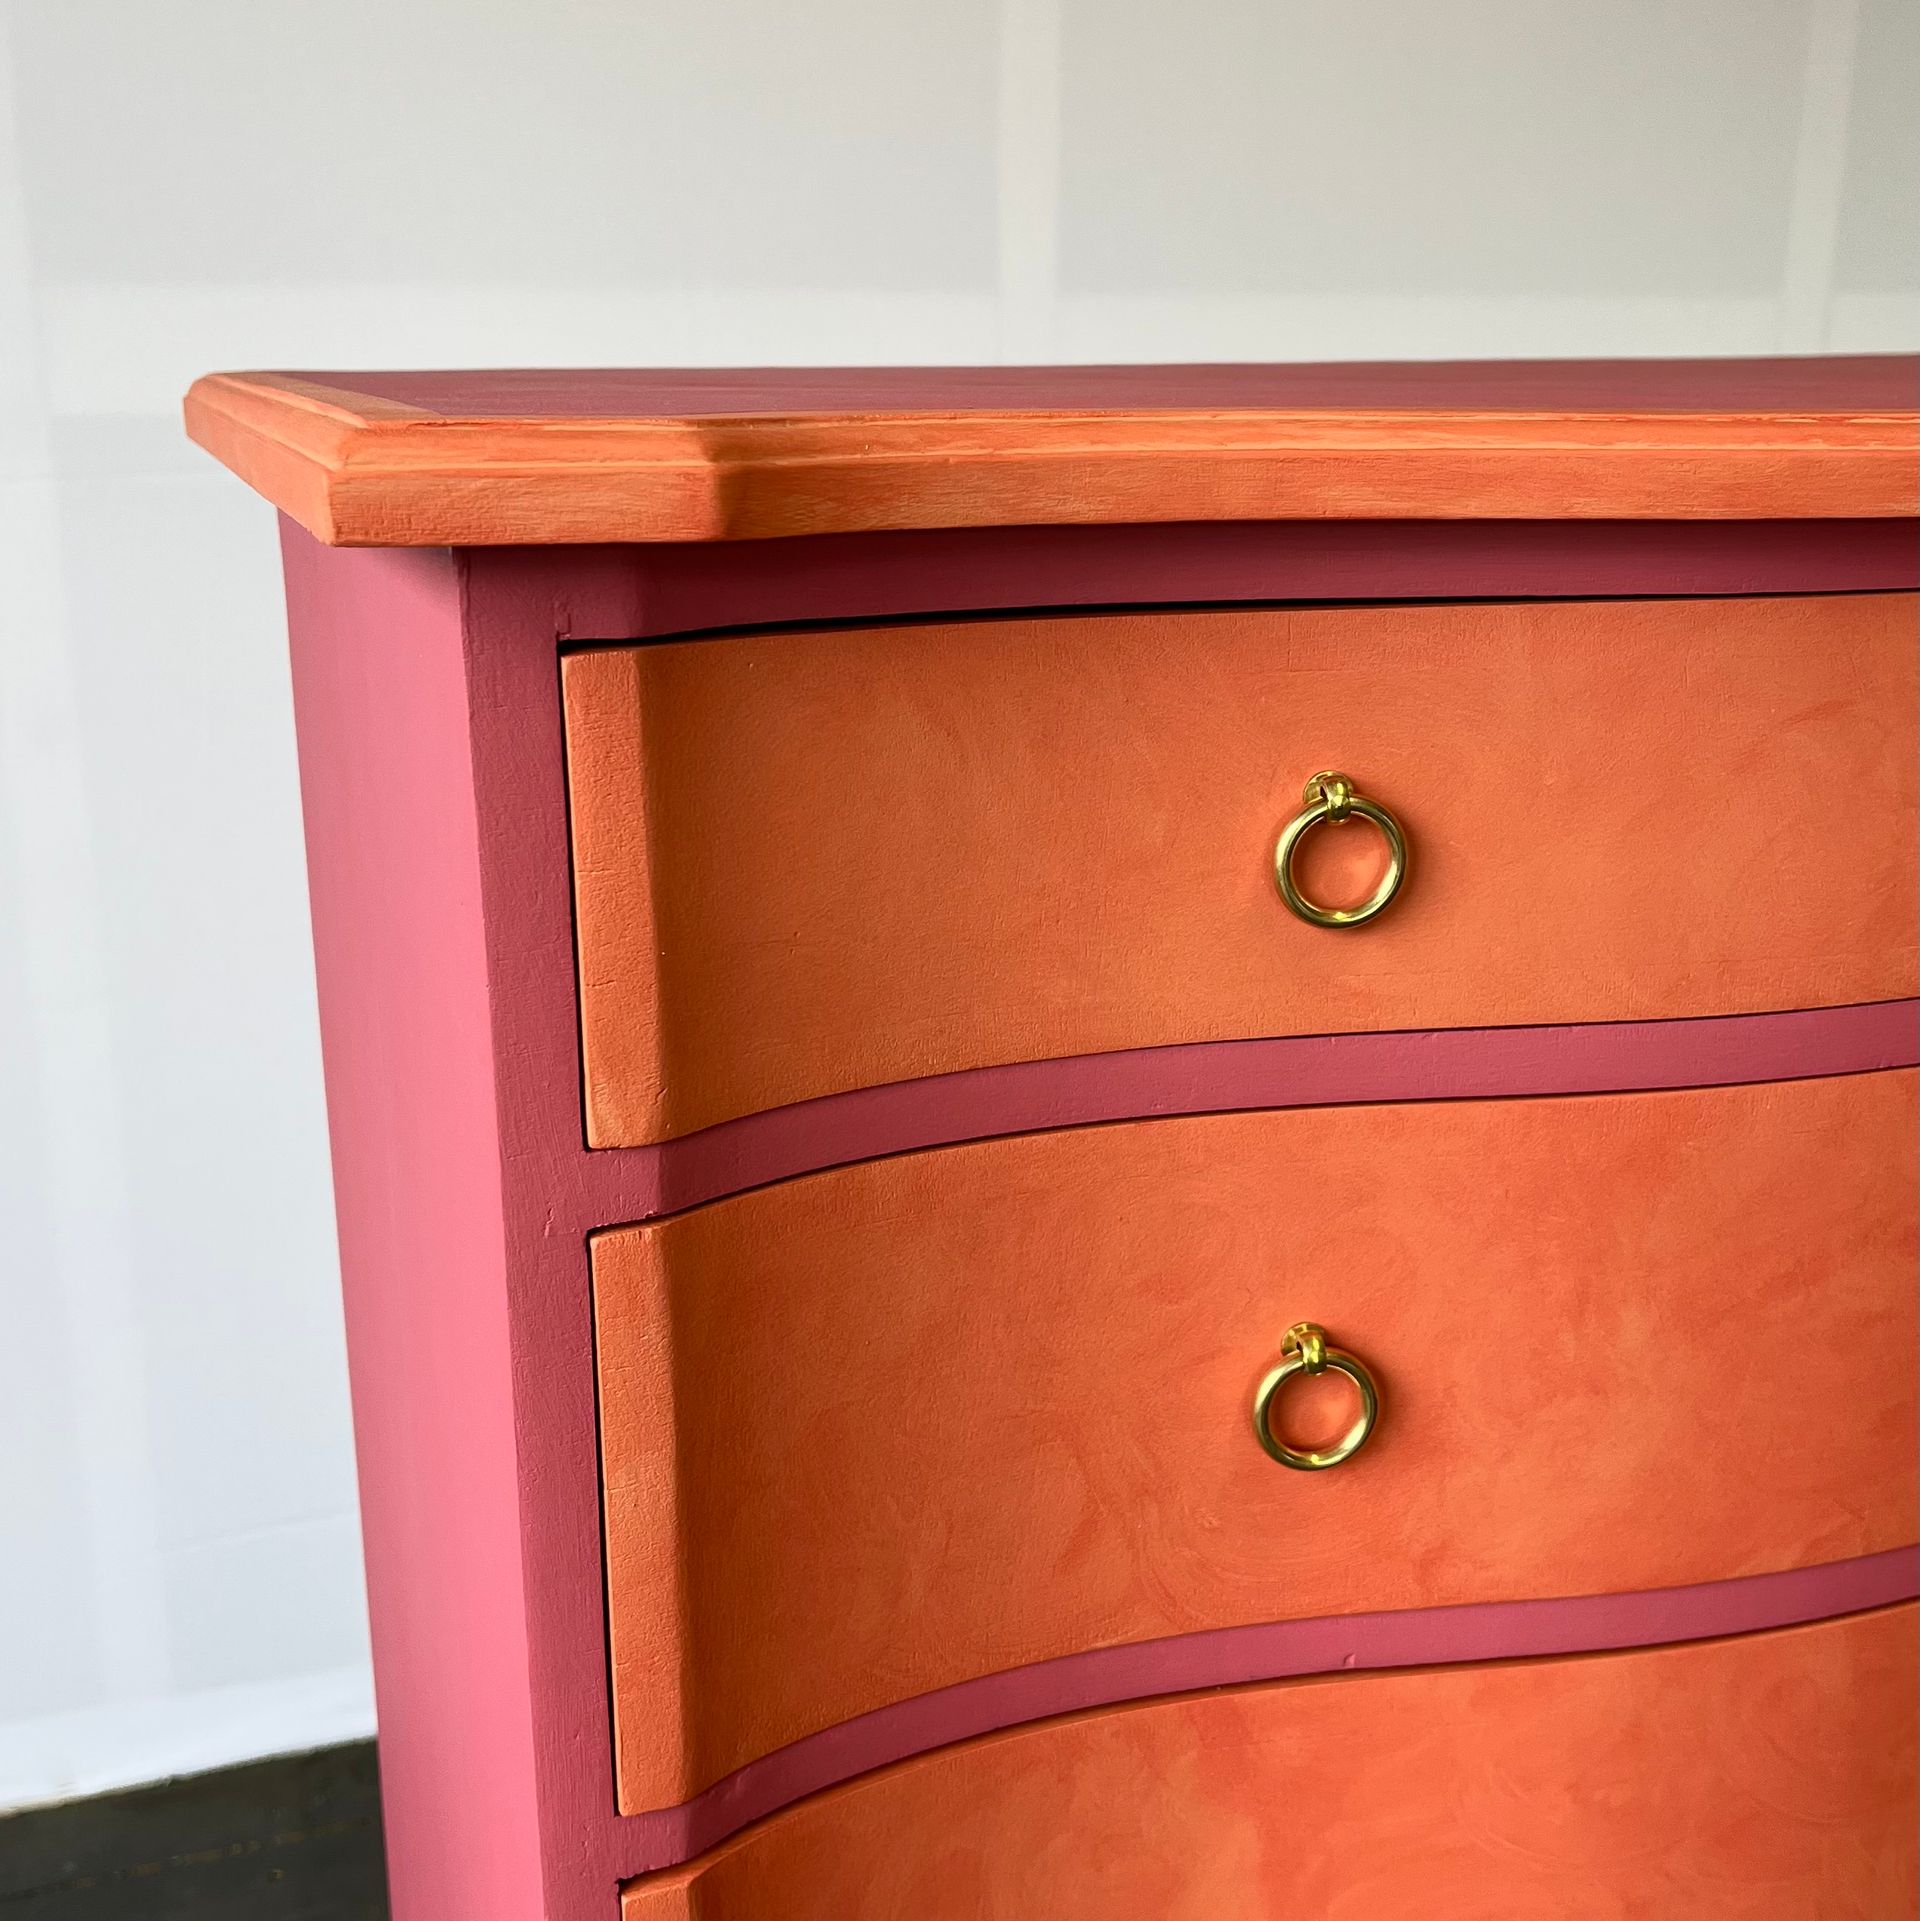 New modern brass pull handles on upcycled Persian rose pink drawers.